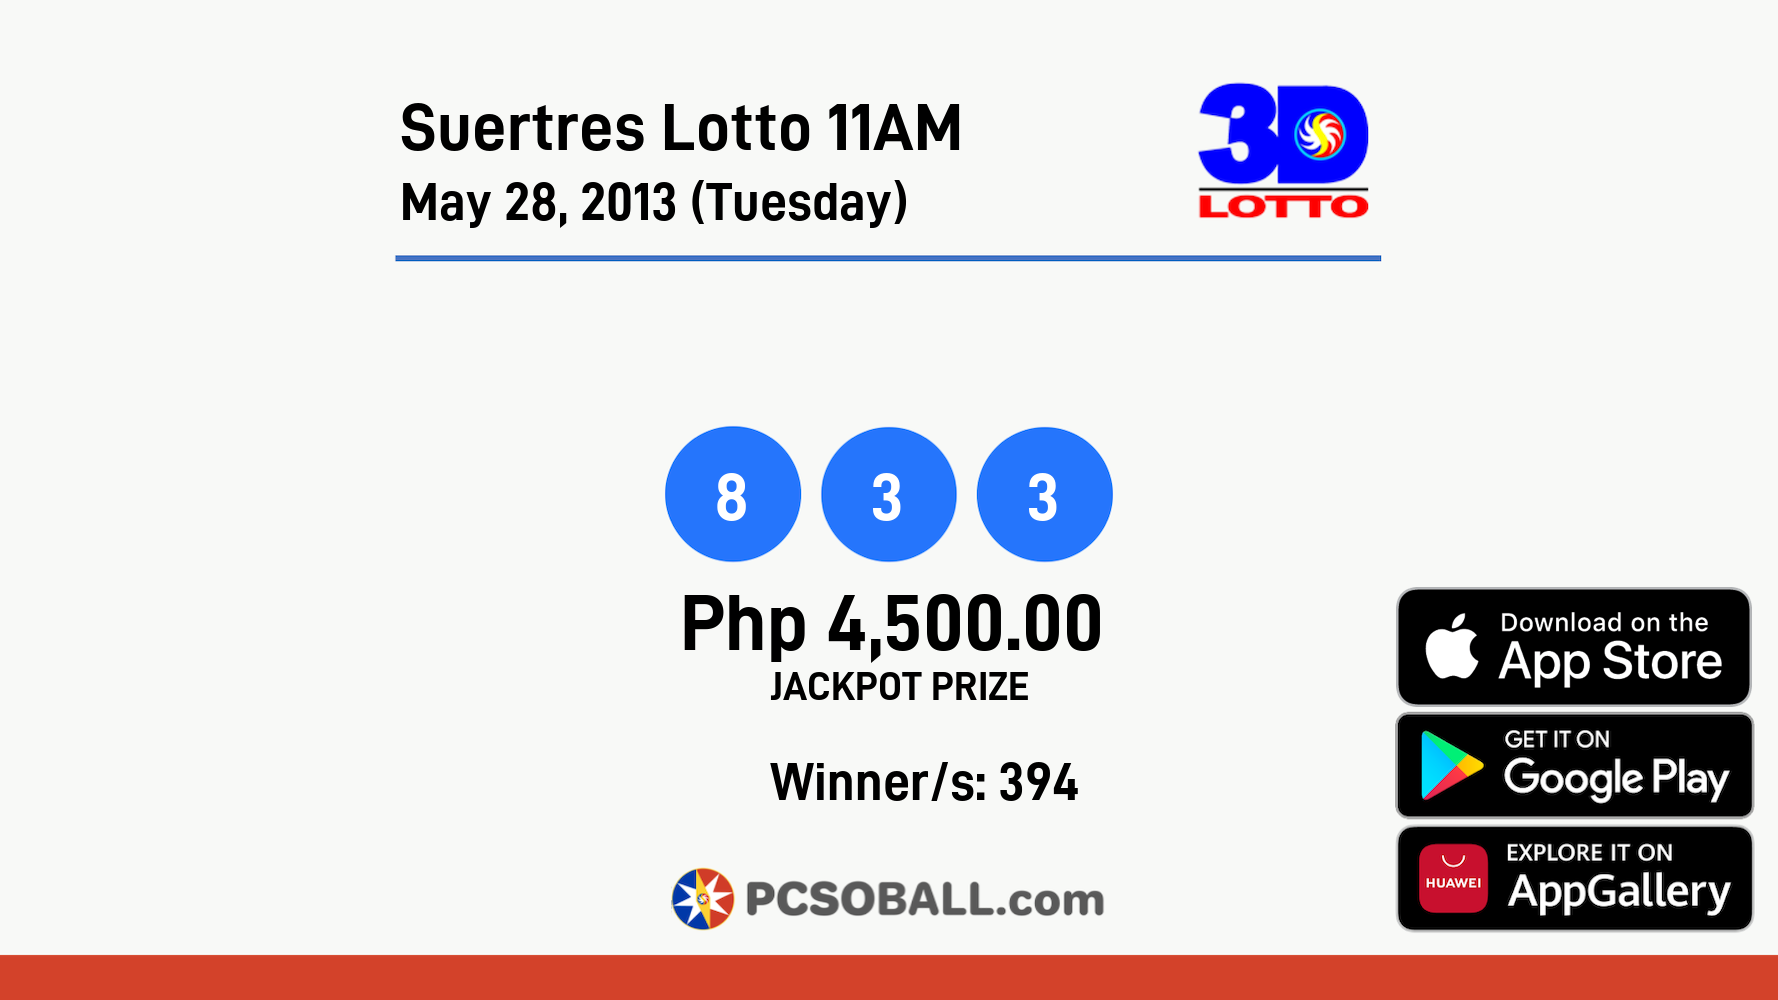 Suertres Lotto 11AM May 28, 2013 (Tuesday) Result